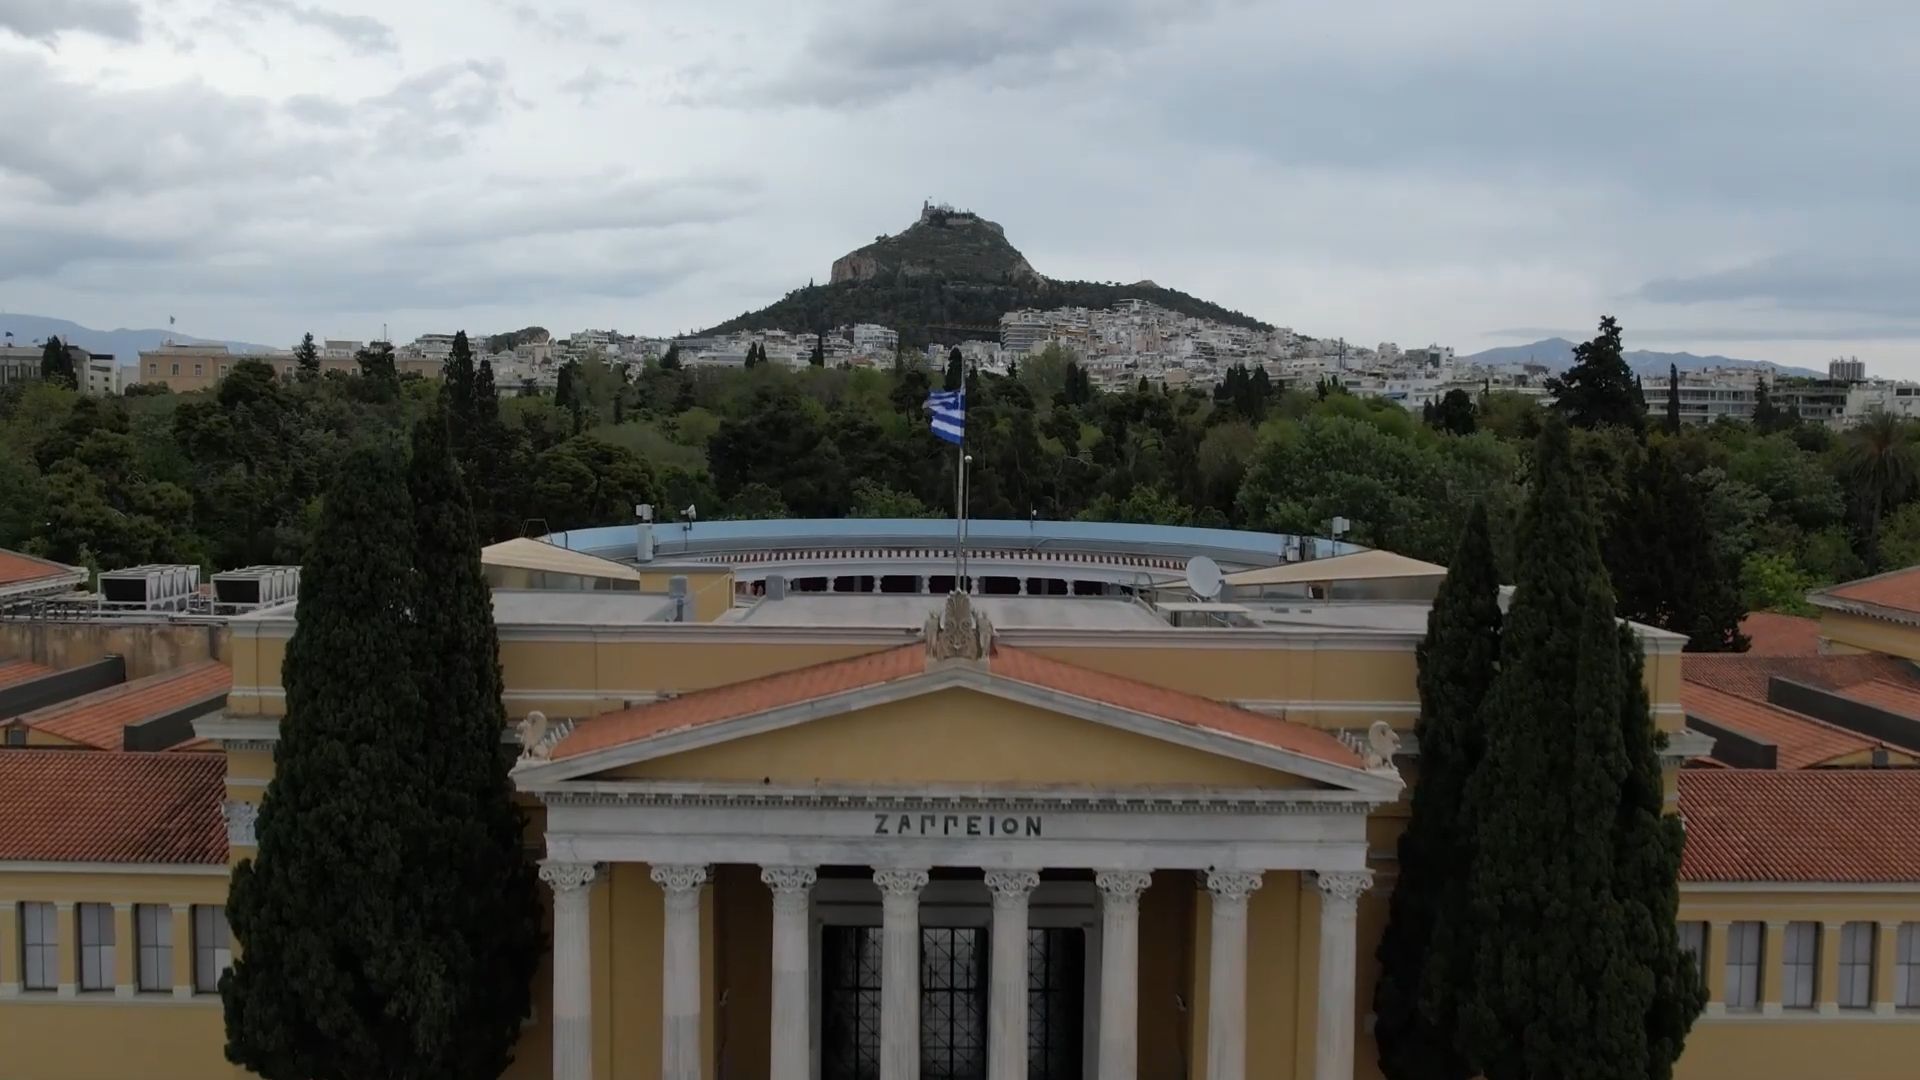 The enchanting beauty of Lycabettus and Zappeion through the 